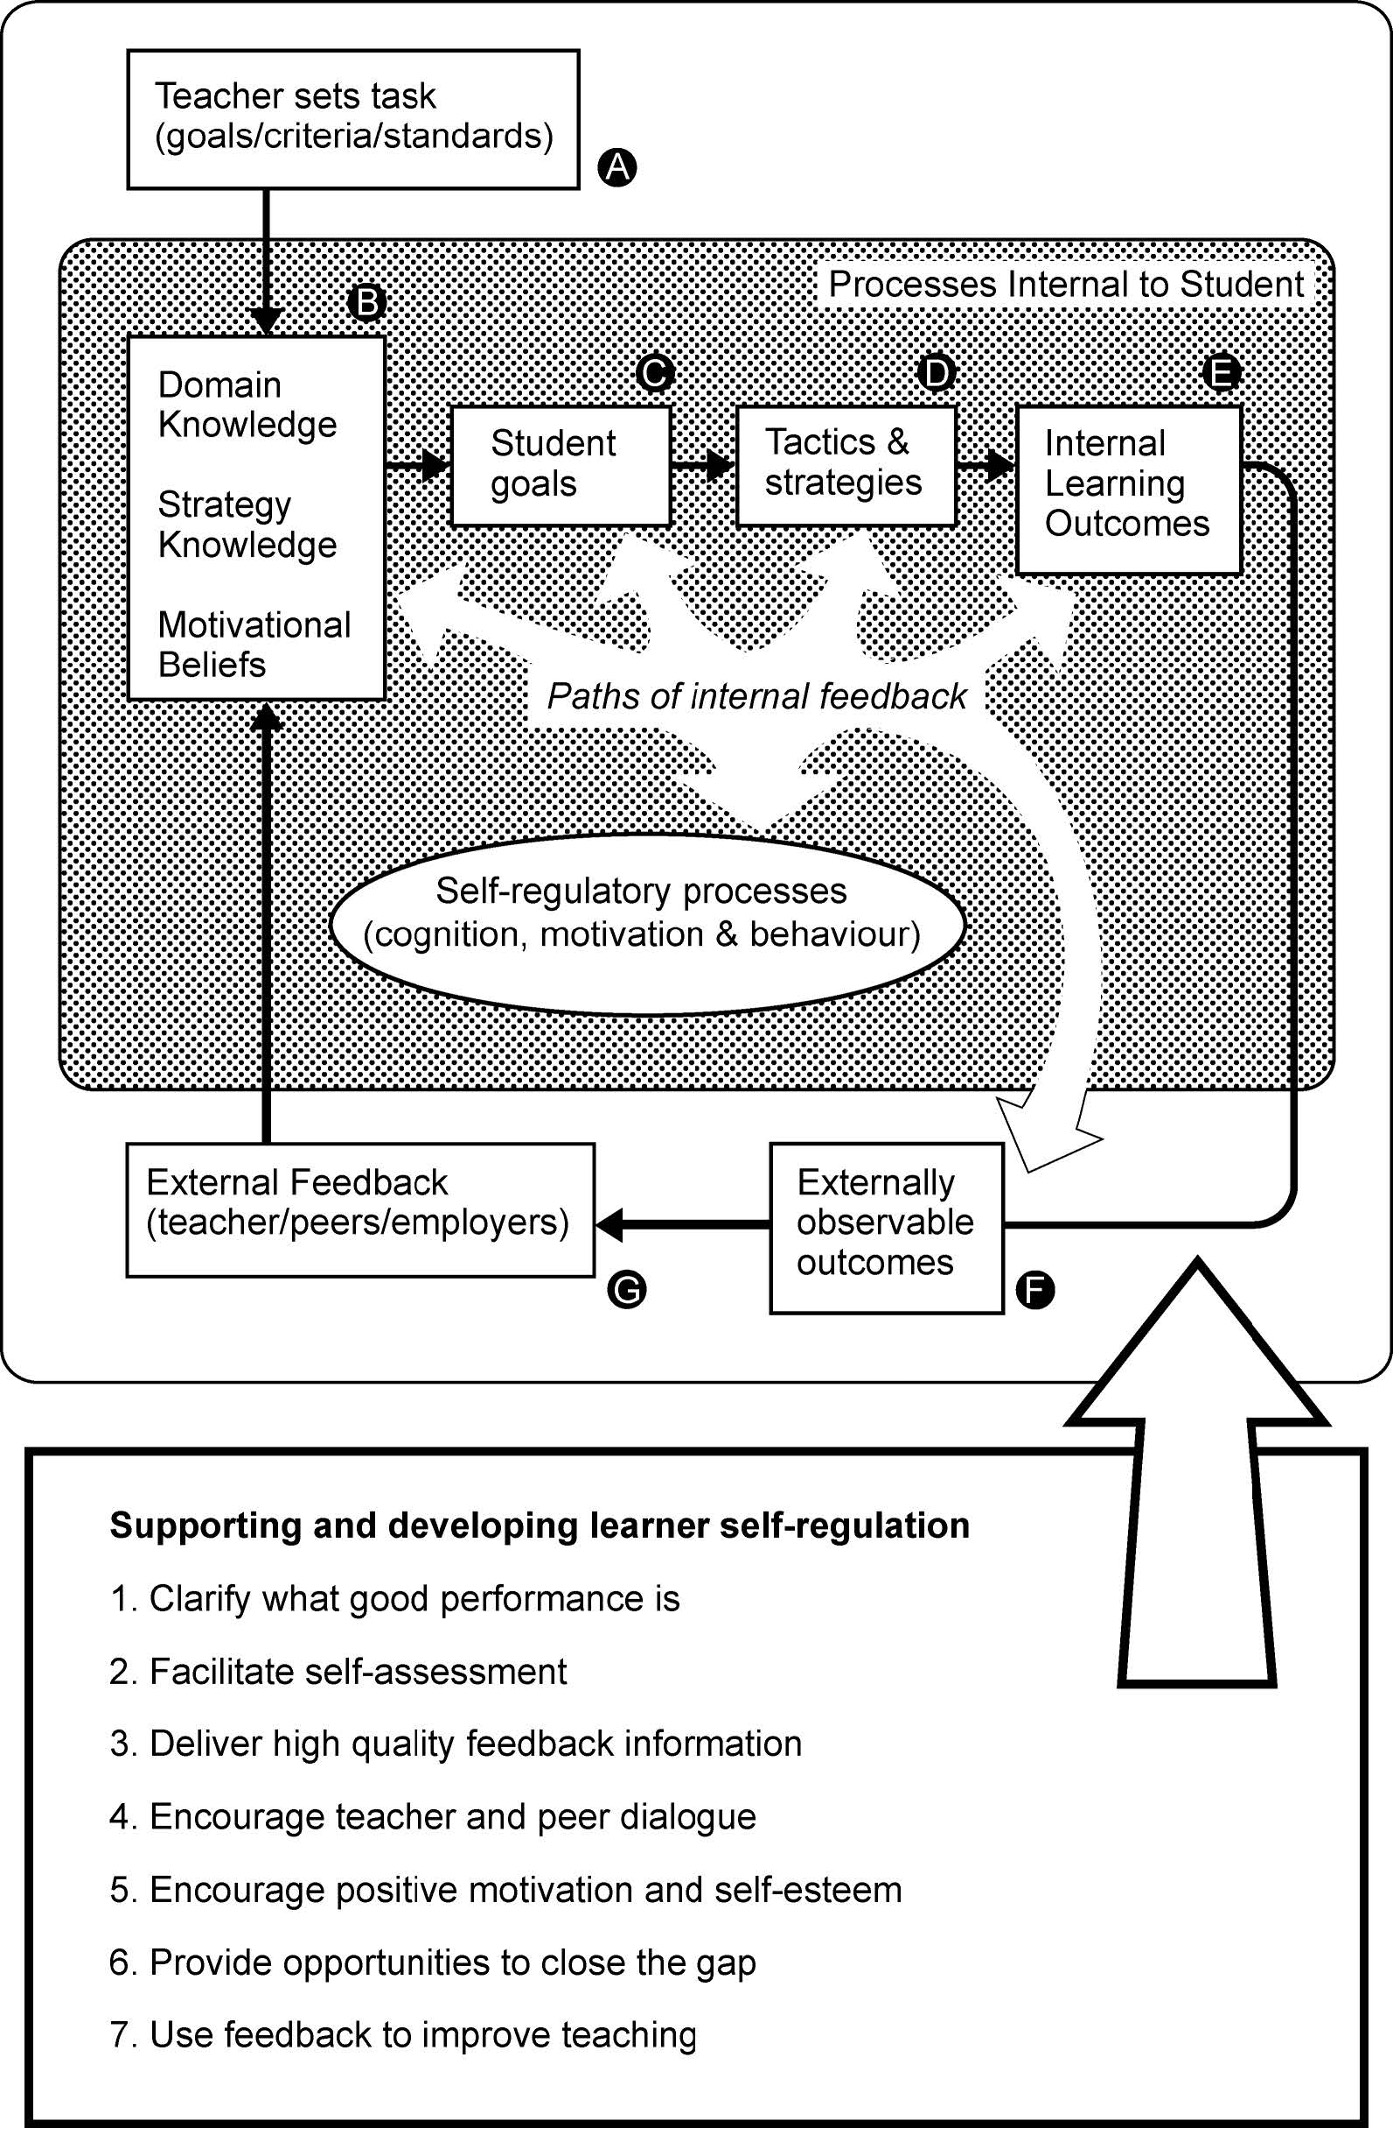 Model of self-regulated learning and the feedback principles that support and develop self-regulation in students 